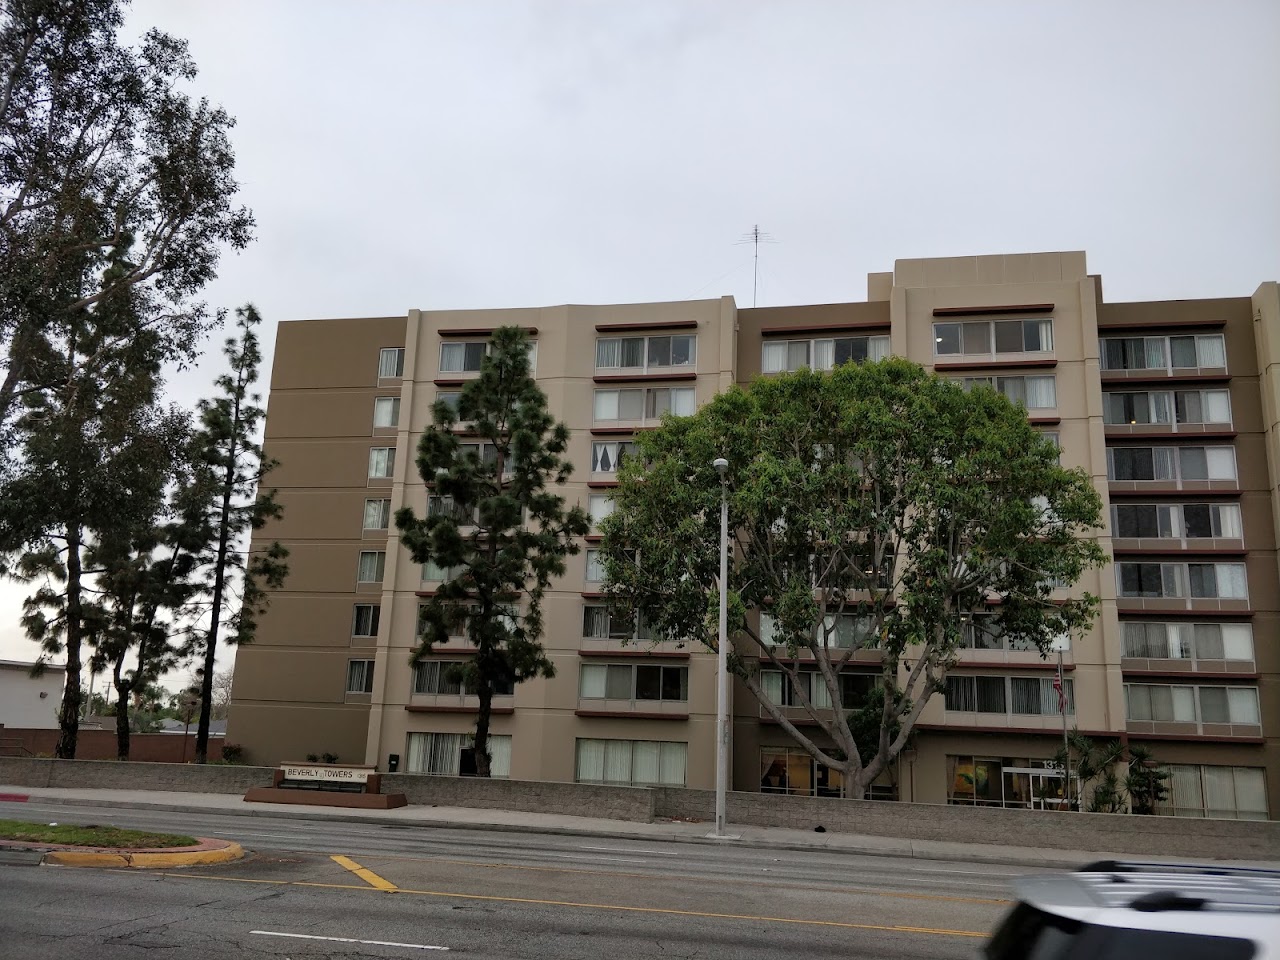 Photo of BEVERLY TOWERS. Affordable housing located at 1315 W BEVERLY BLVD MONTEBELLO, CA 90640